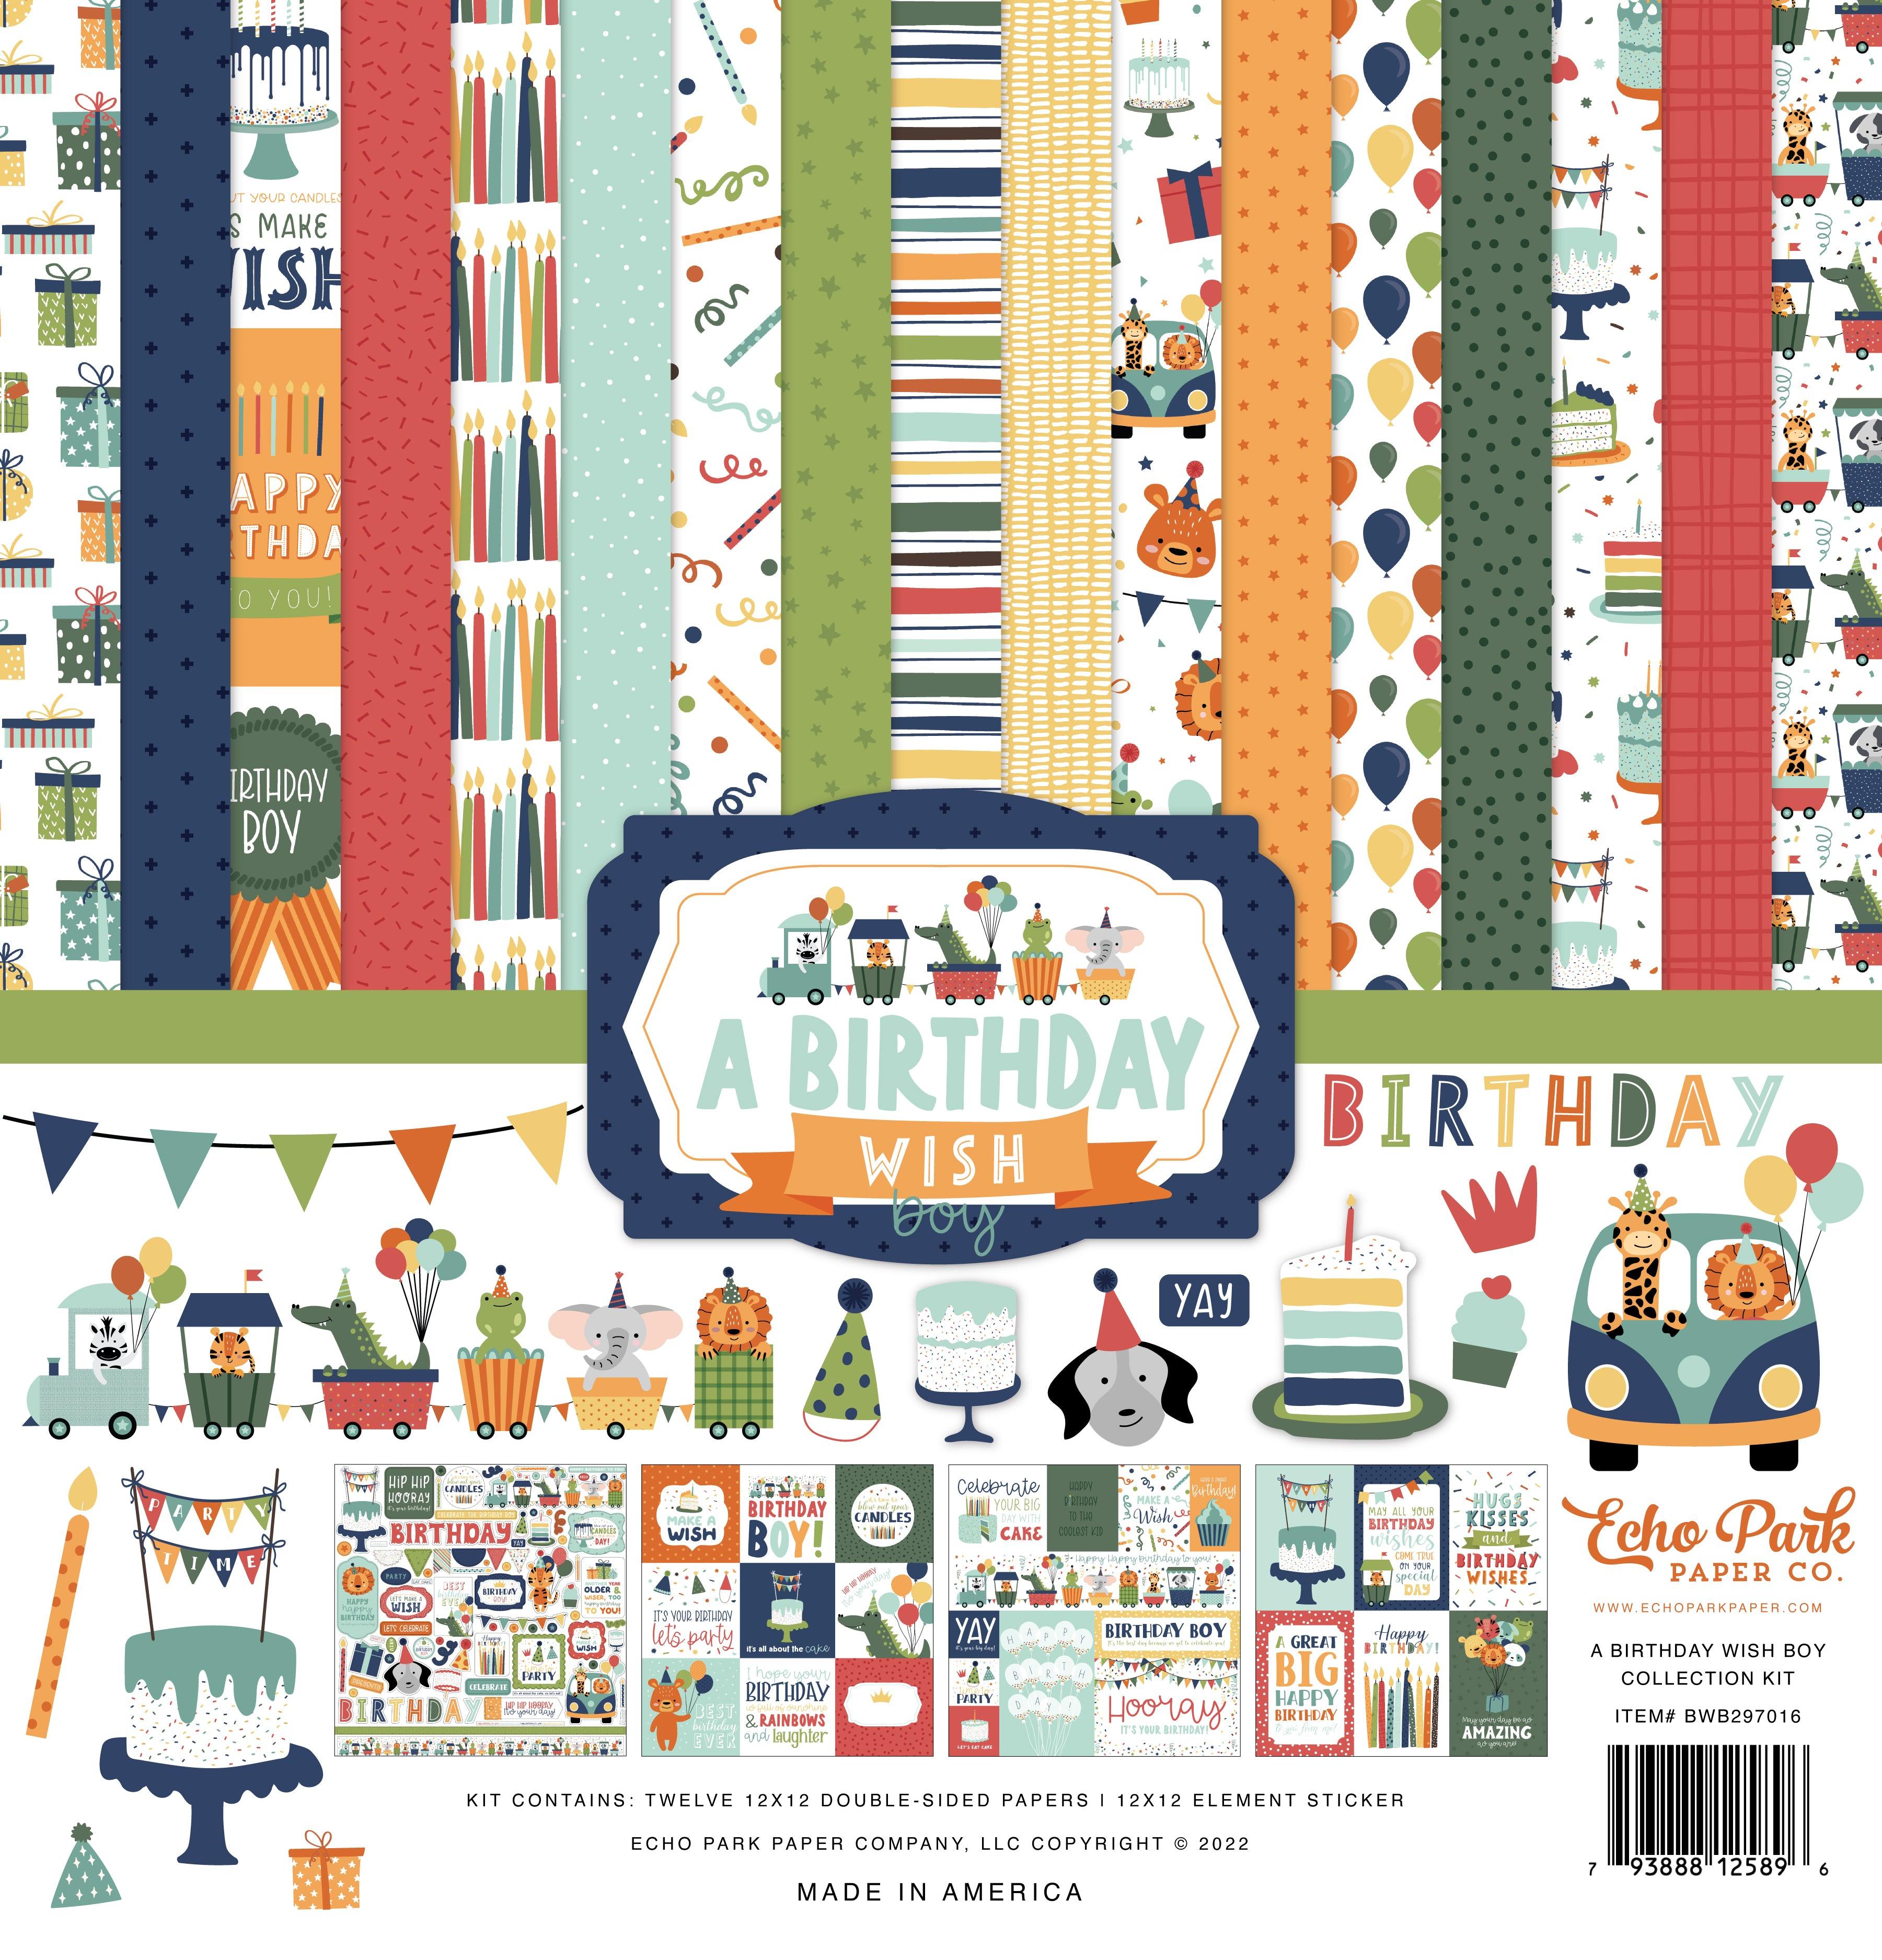 A Birthday Wish Boy Collection 13-Piece Collection Kit by Echo Park Paper